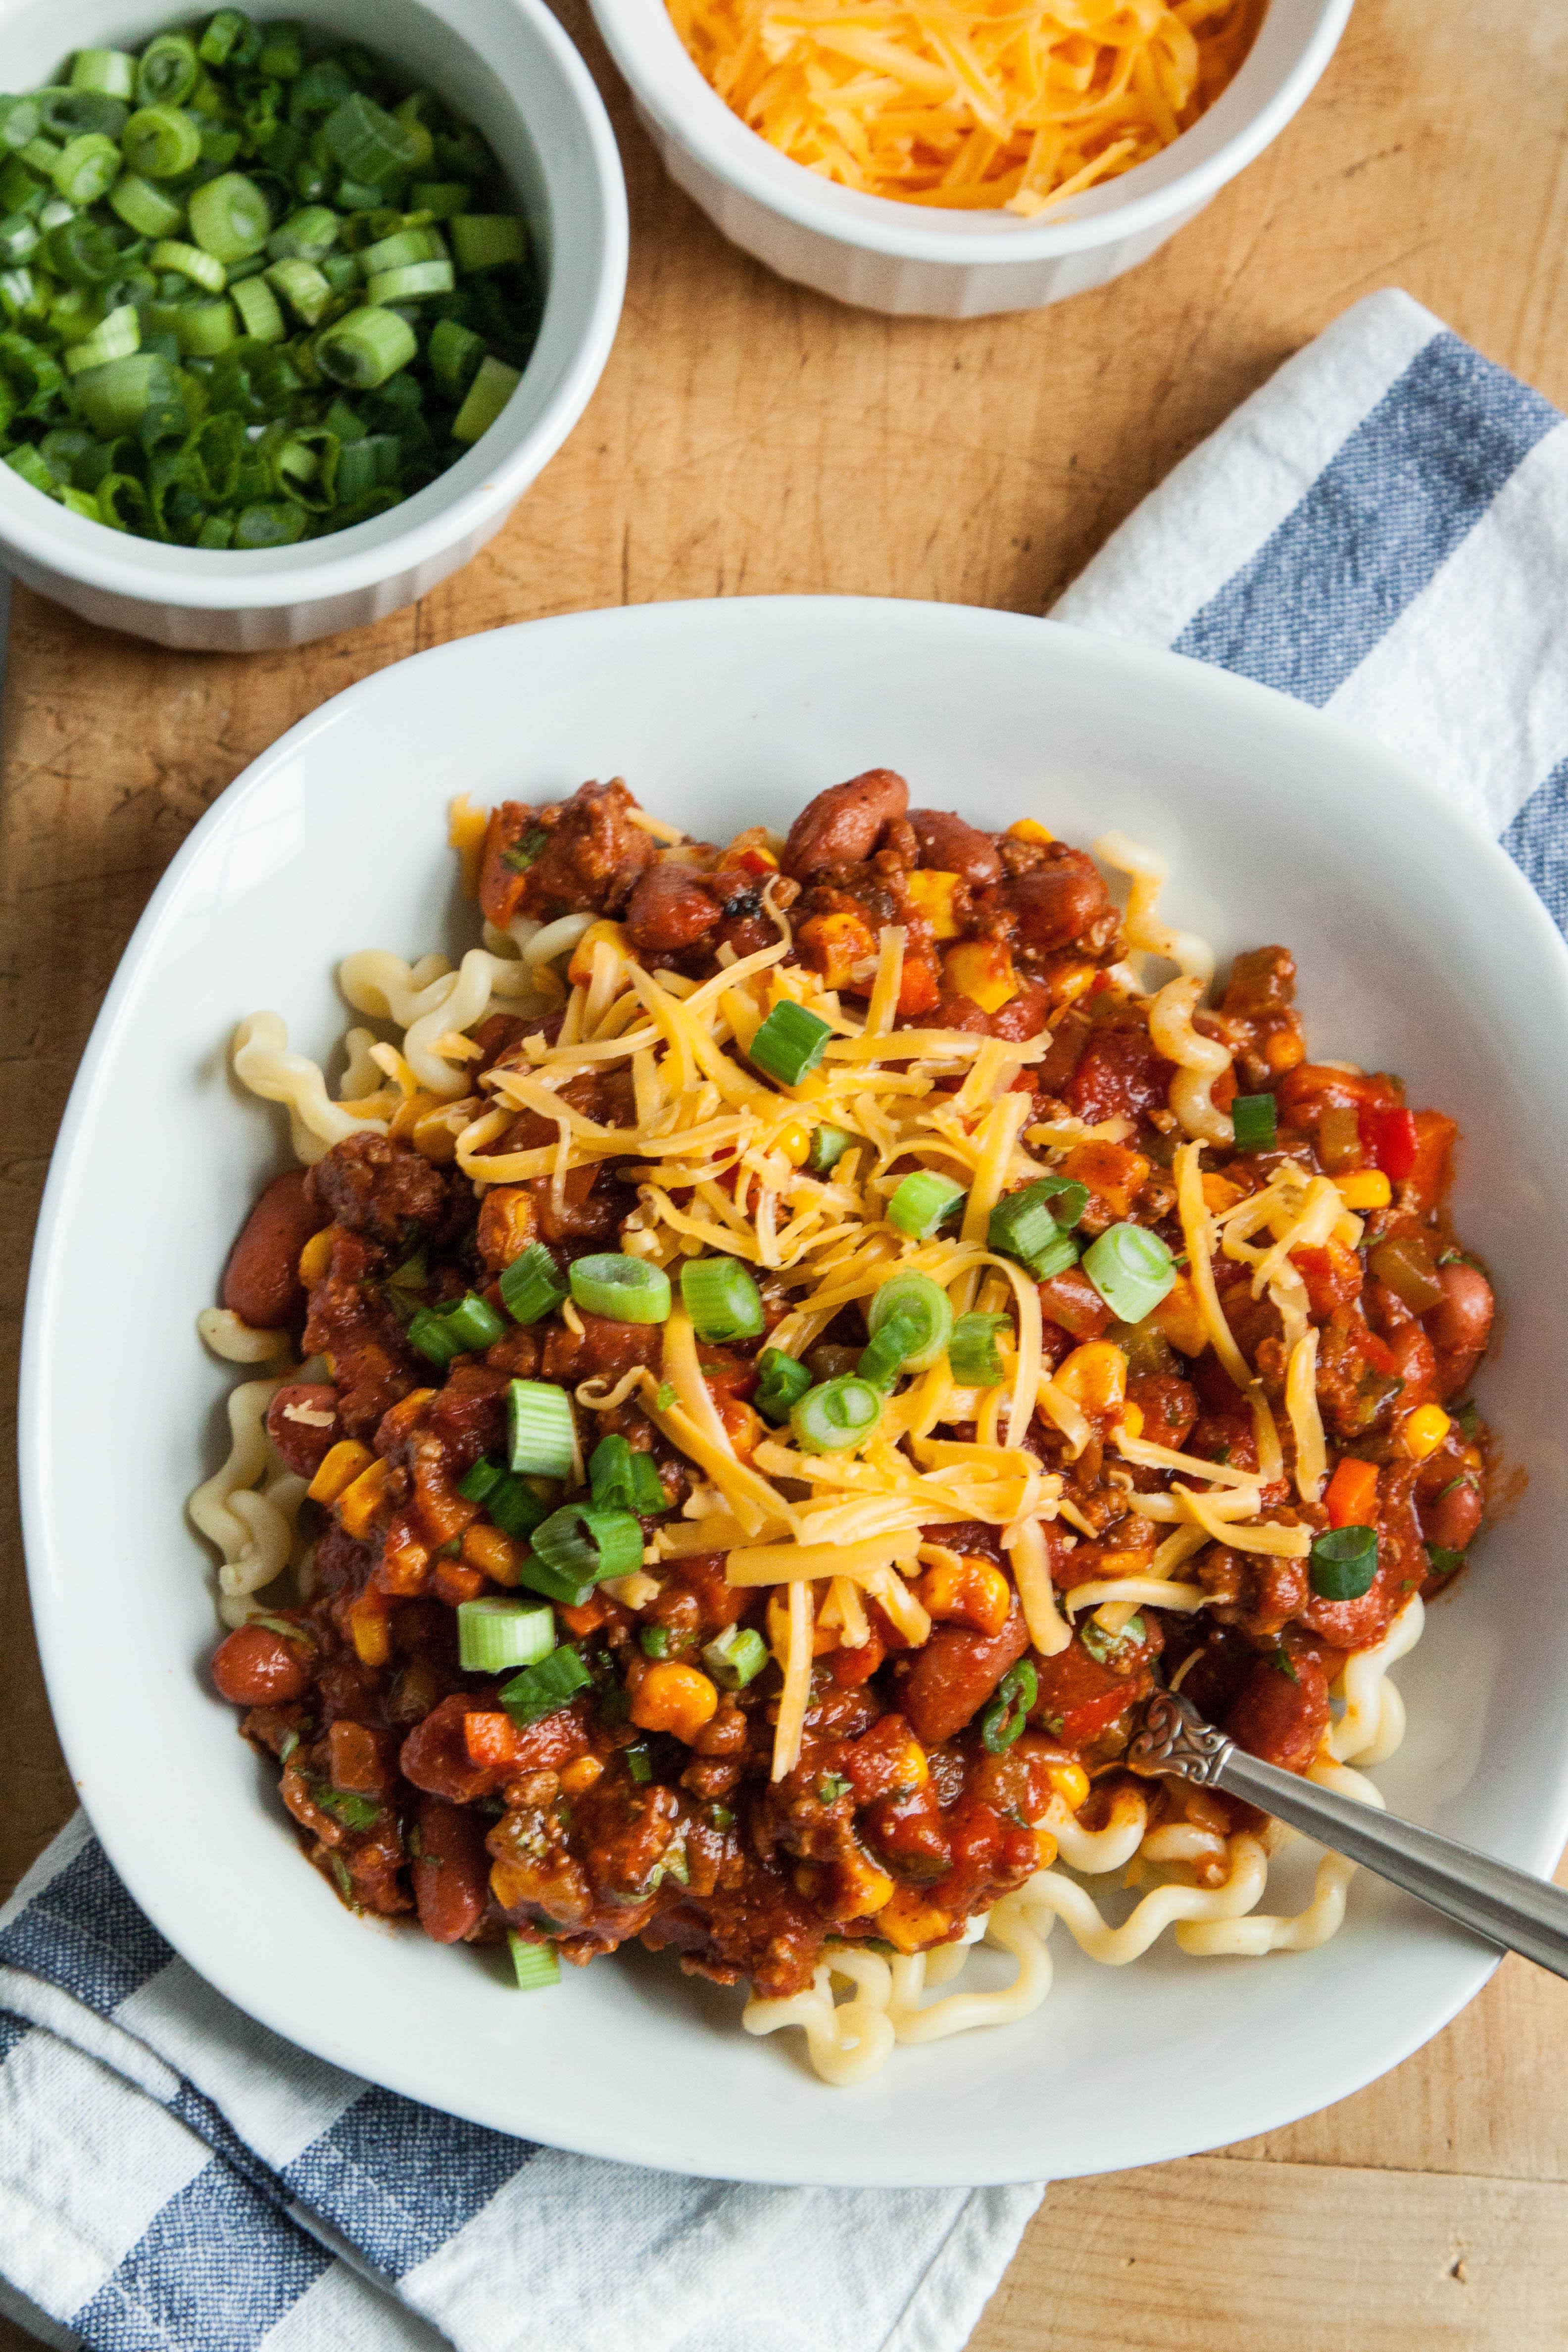 Recipe: Chili with Pasta and Cheddar | Kitchn